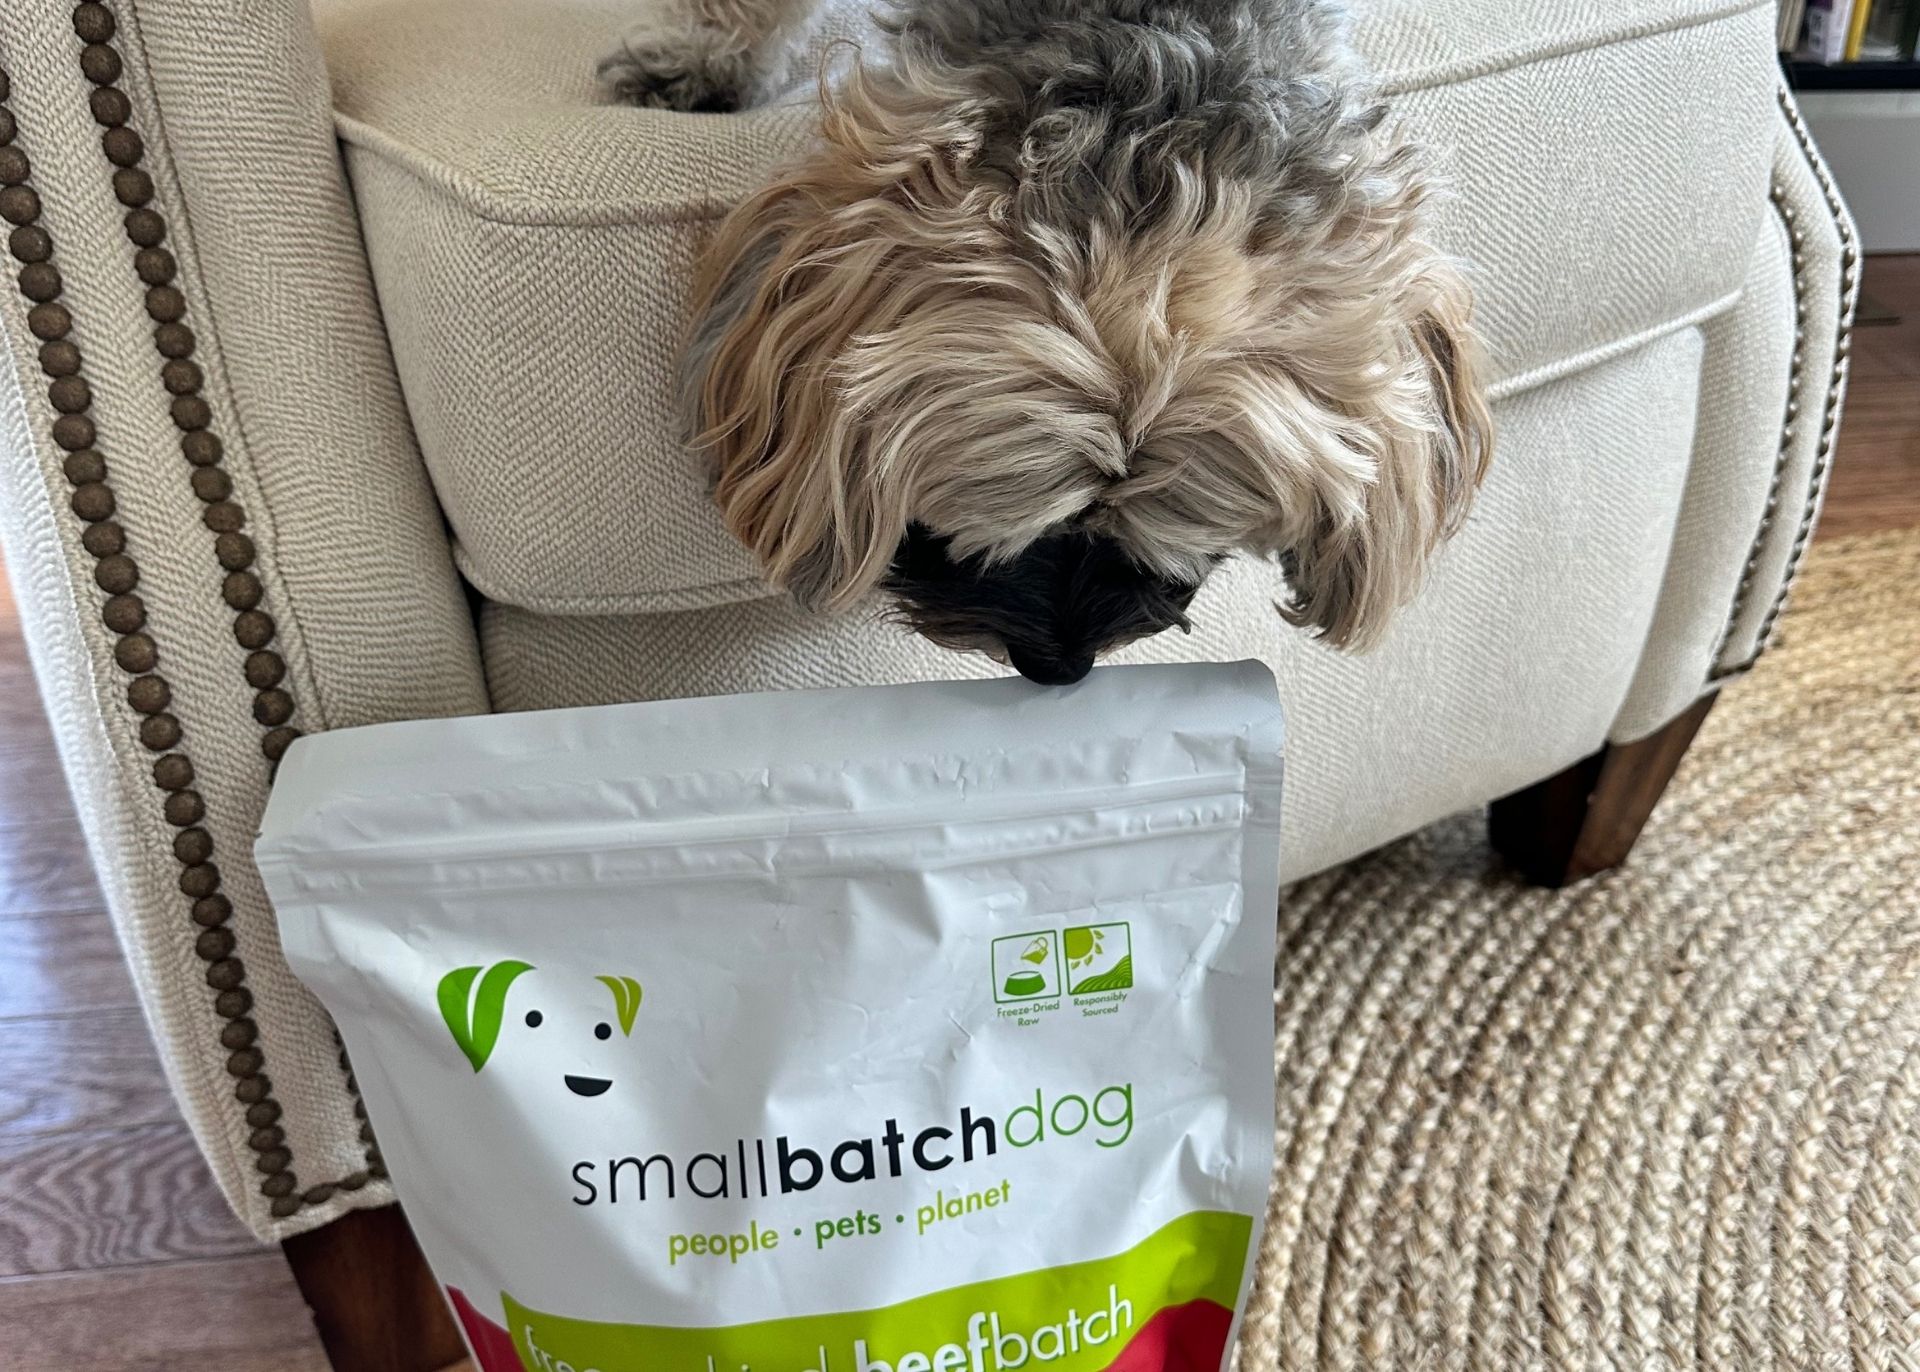 Havanese leaning down from upholstered chair to sniff bag of Small Batch Dog food